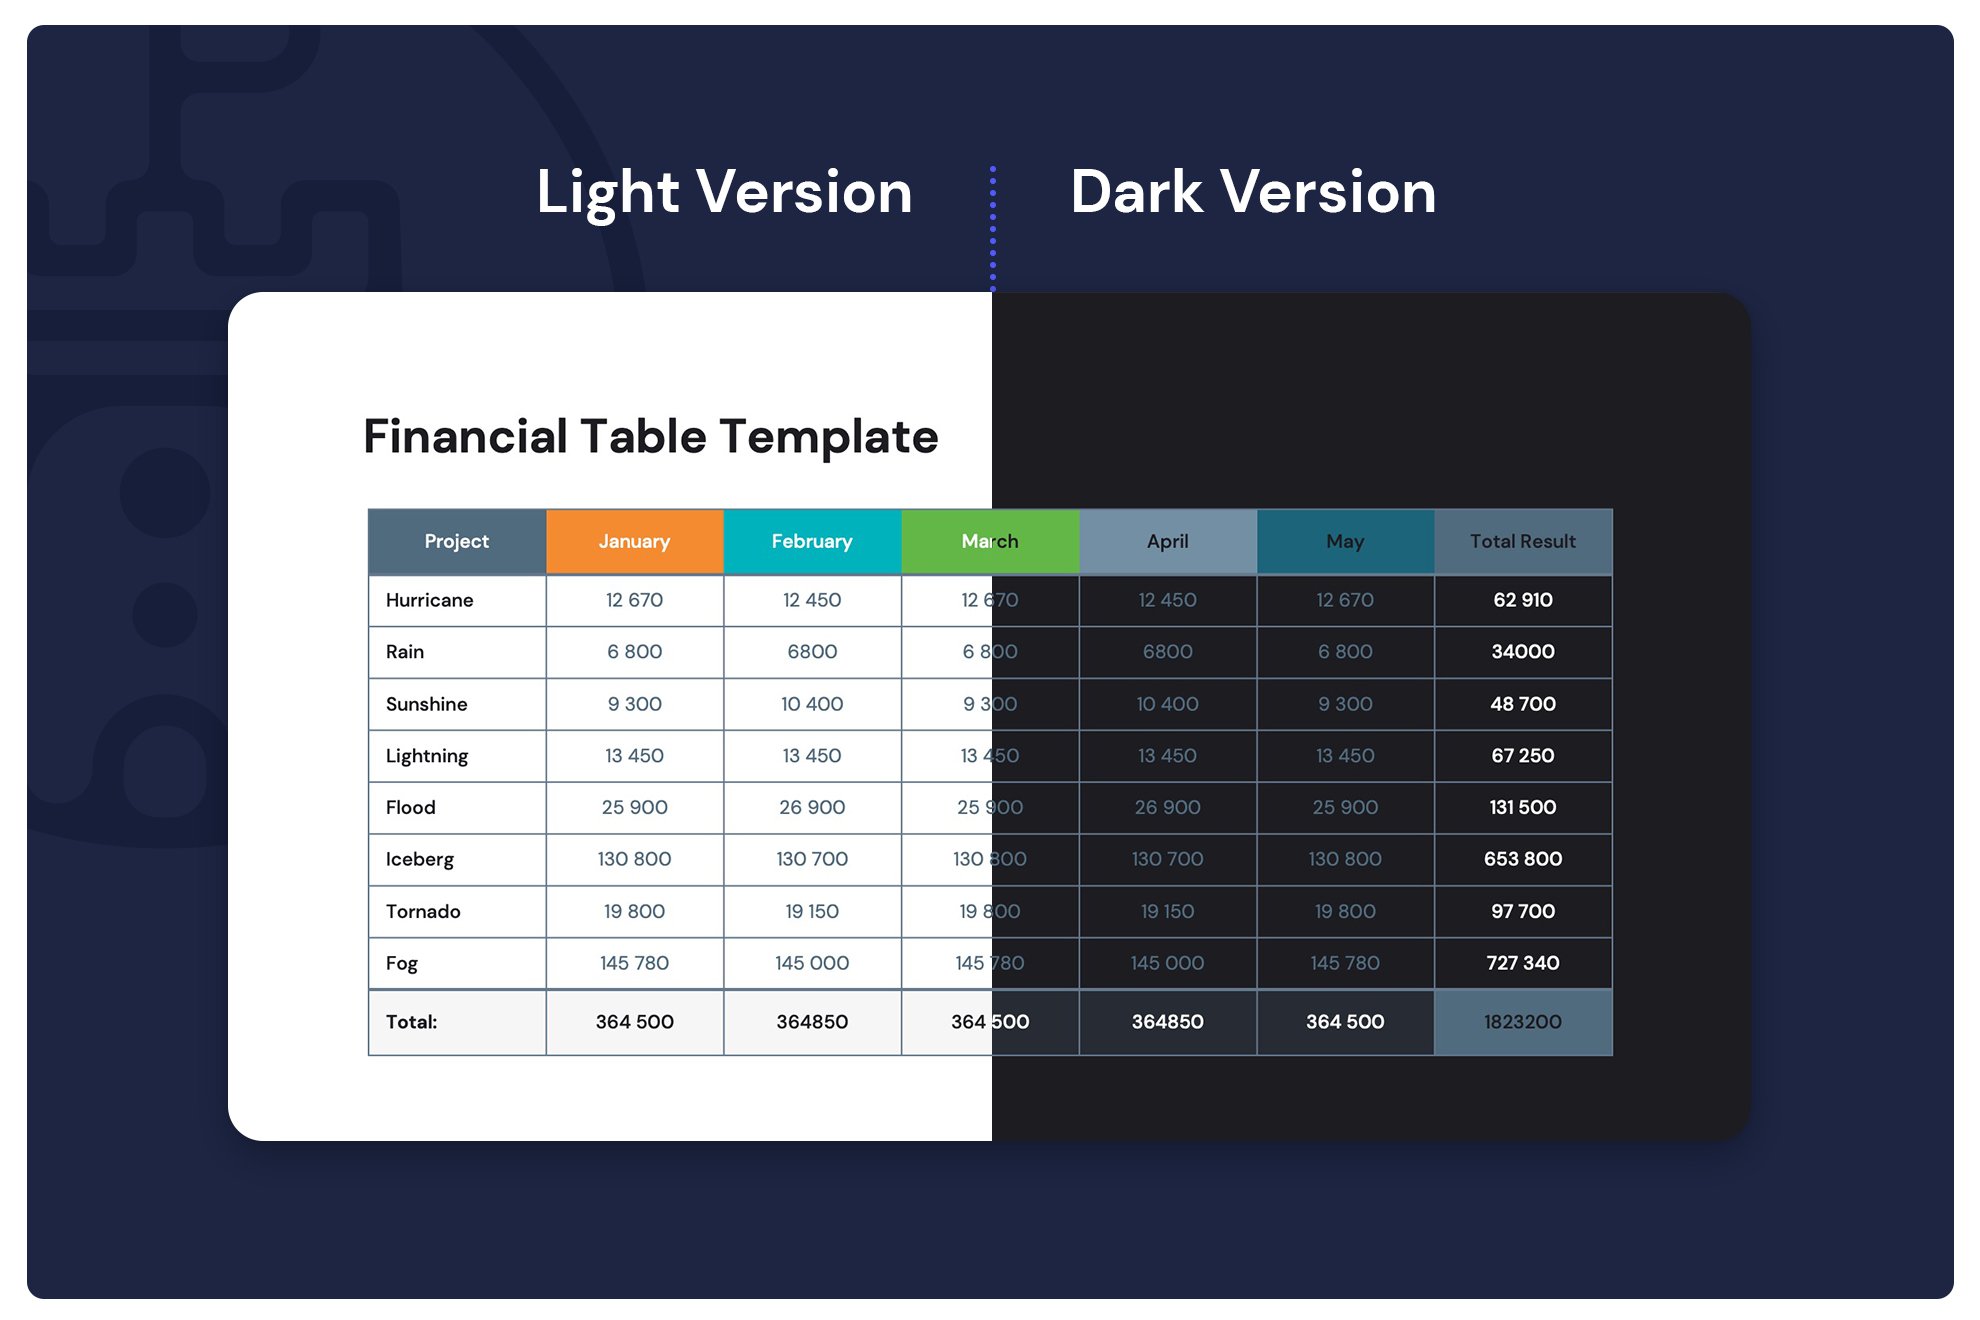 Financial Tables Templates for Power preview image.